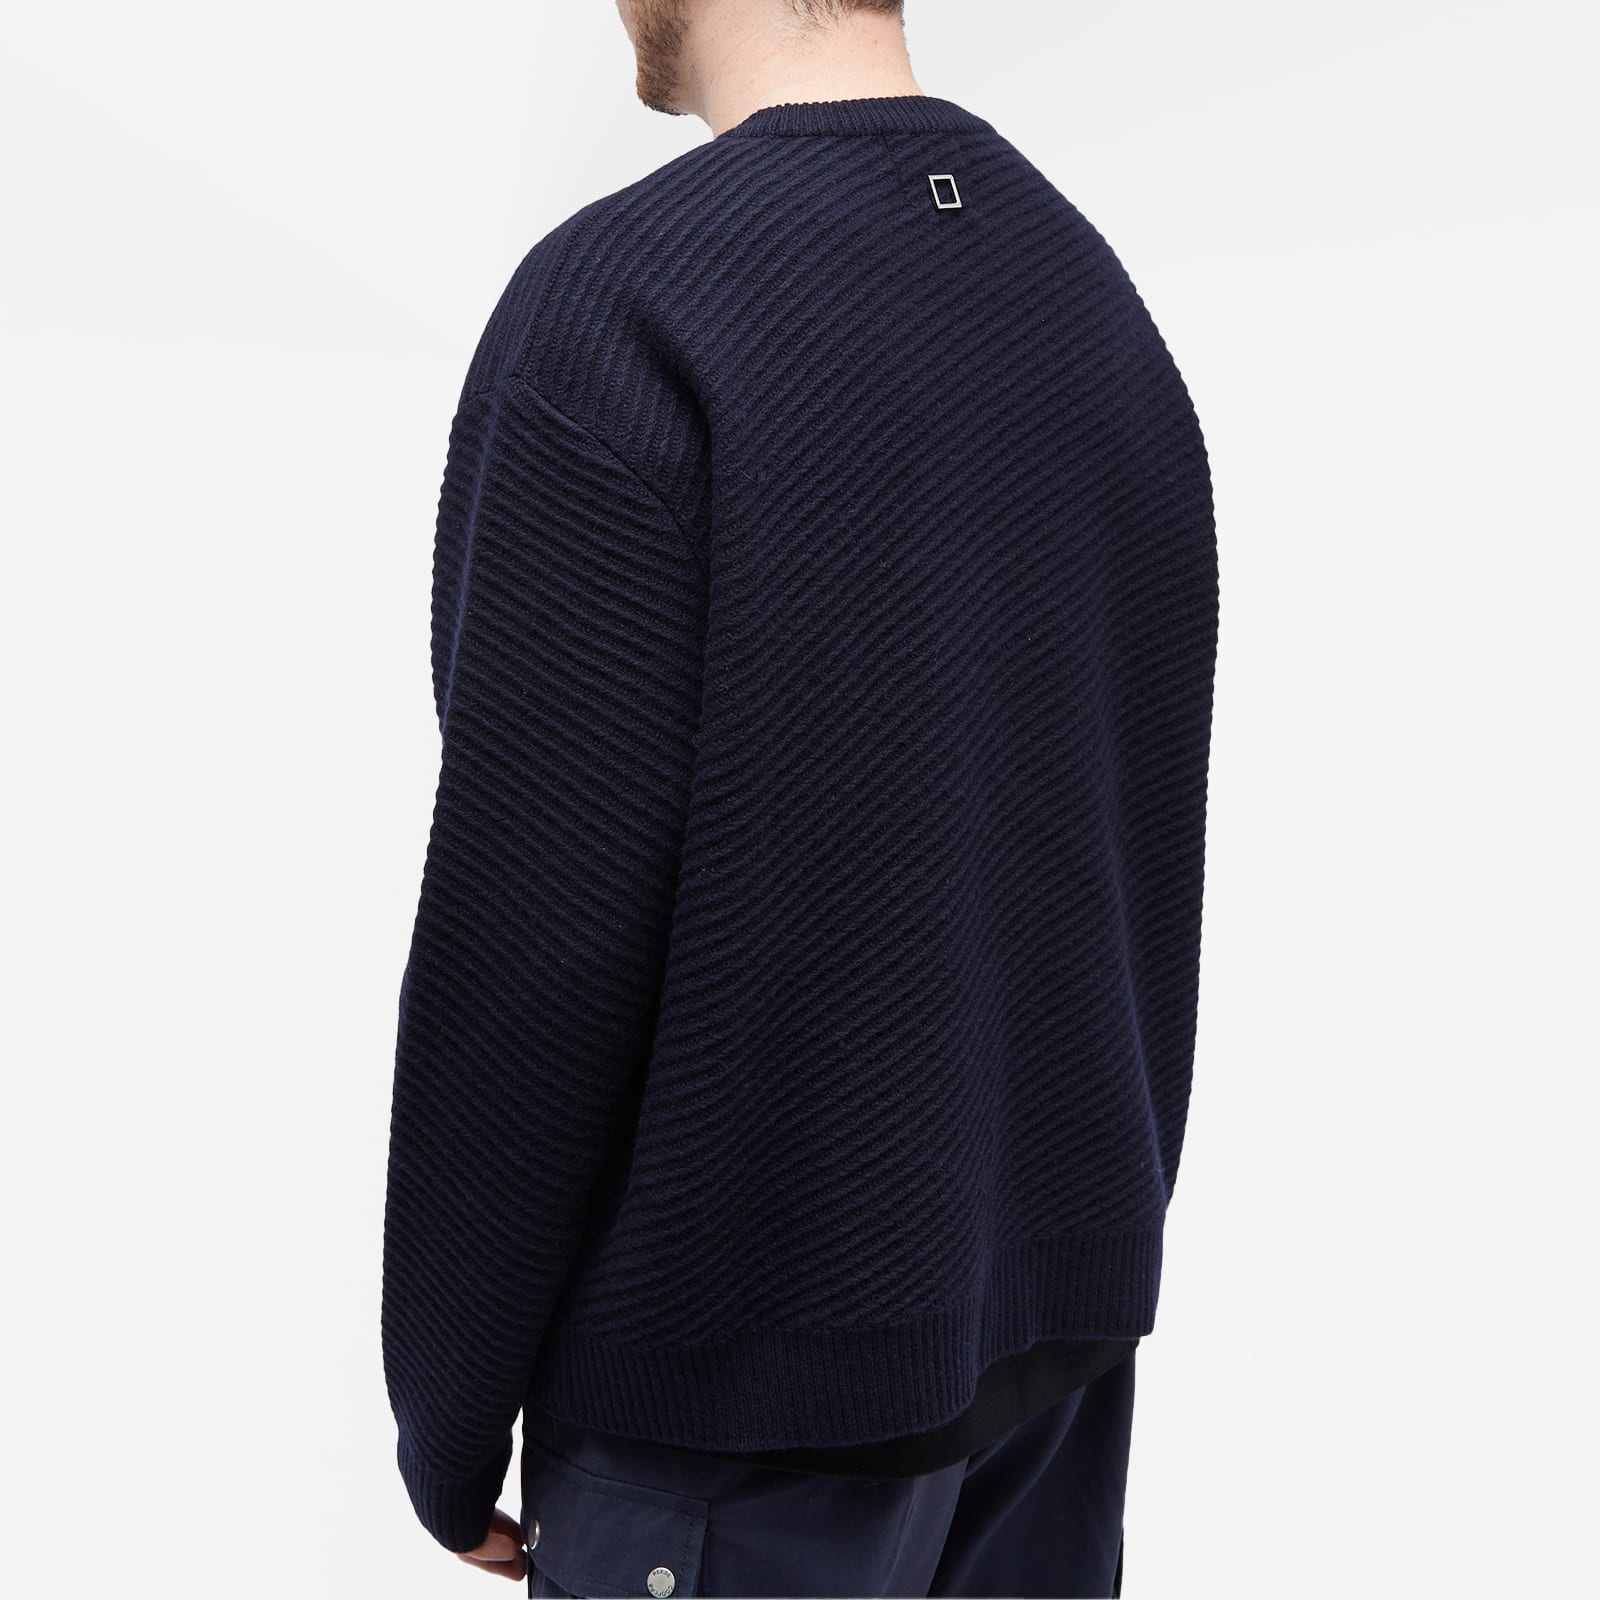 Wooyoungmi Textured Crew Knit - 3